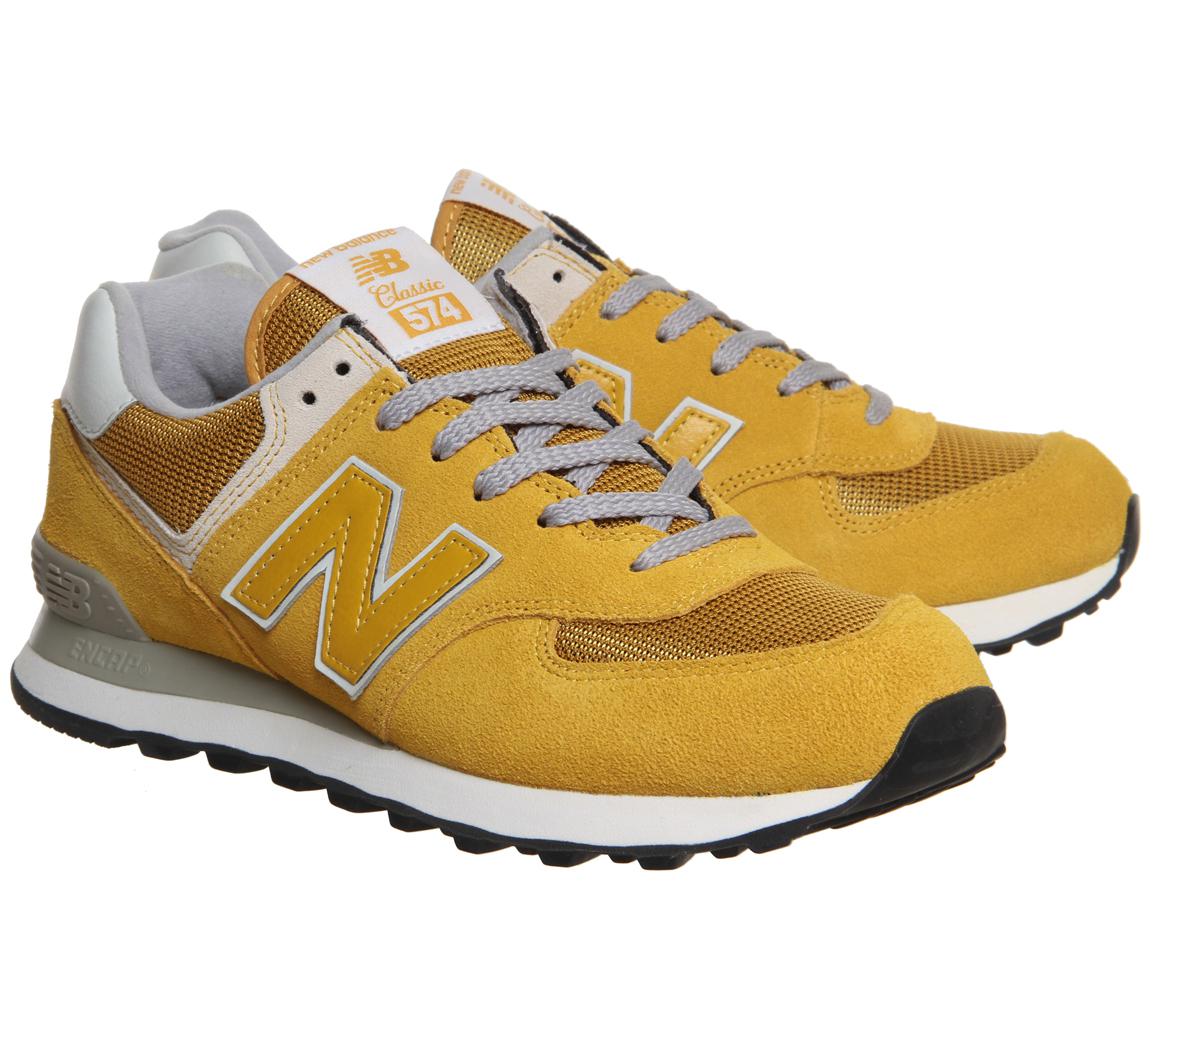 Lyst - New Balance M574 in Yellow for Men